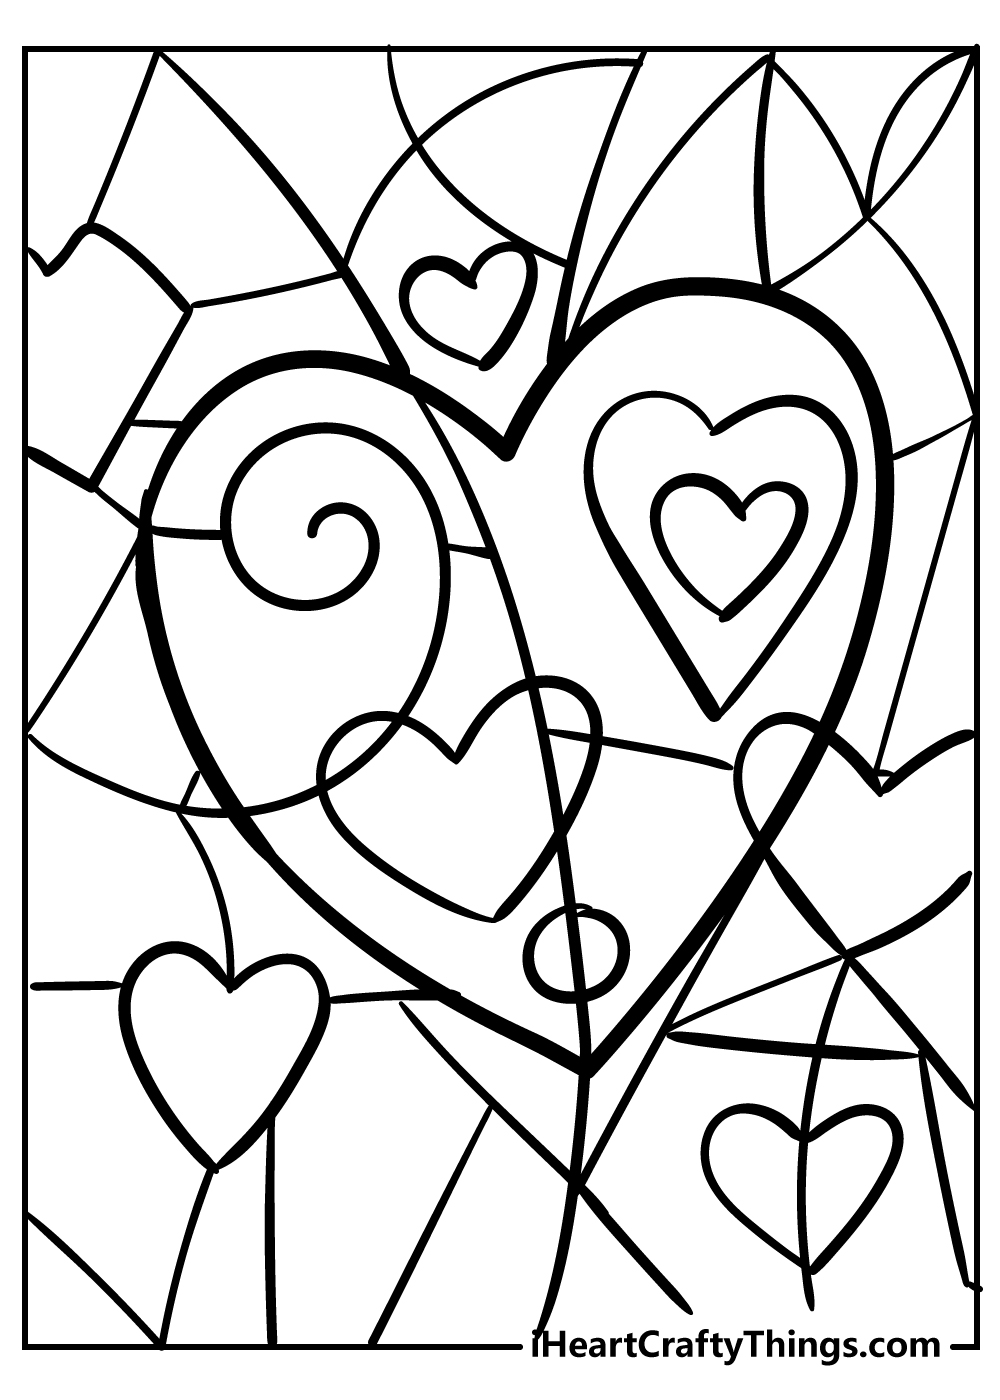 heart coloring page for adults